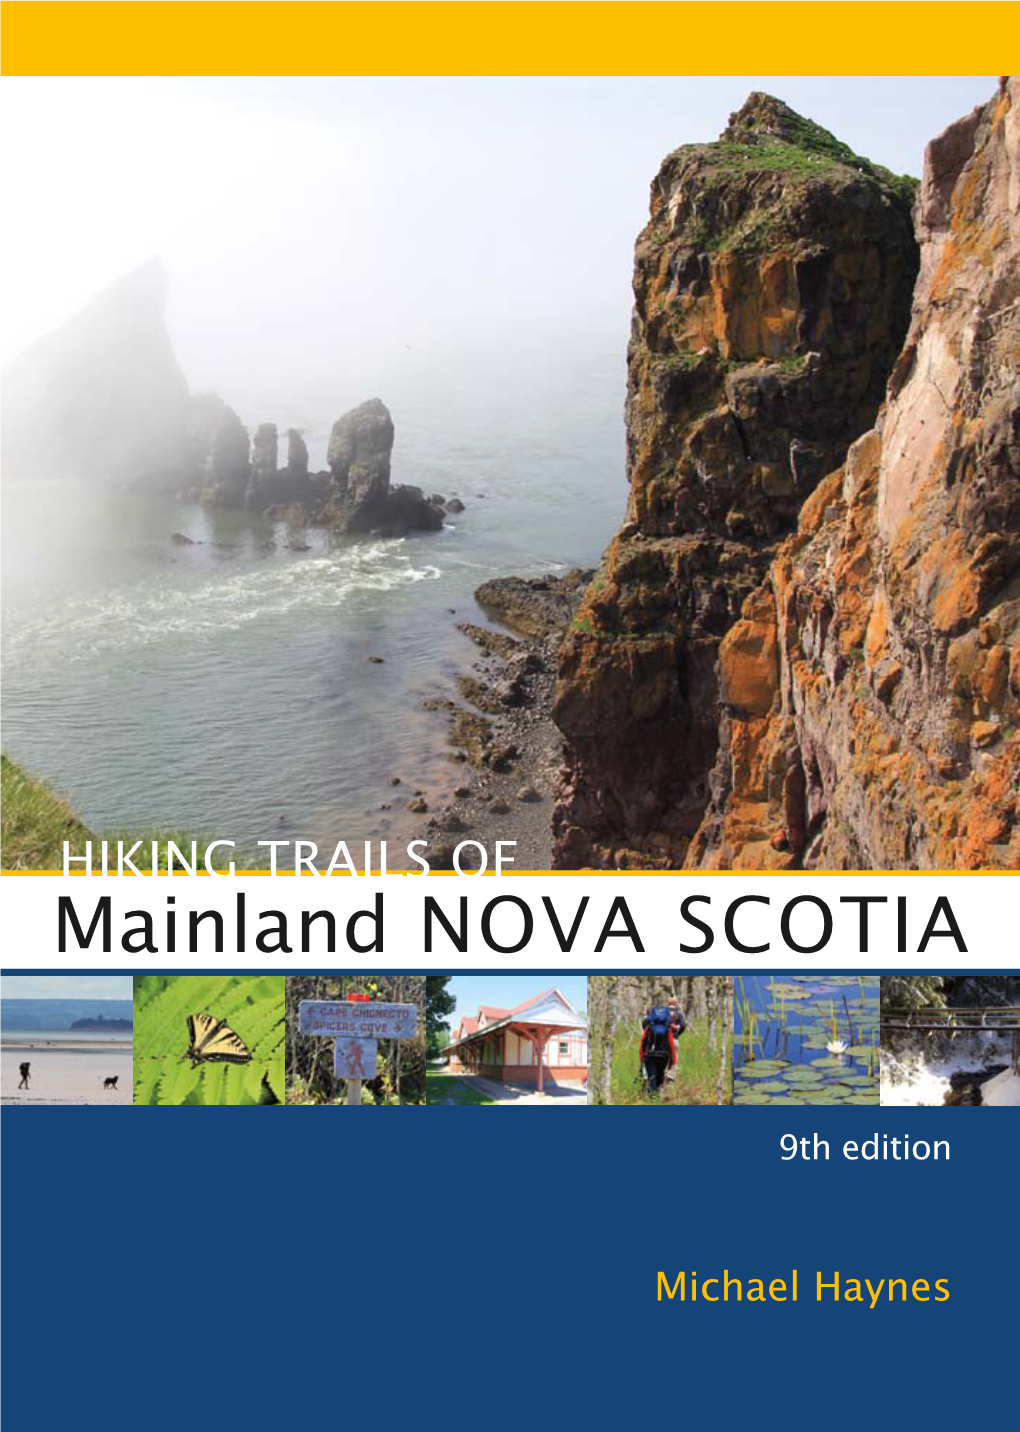 Mainland Nova Scotia Provides Illus- Trated Descriptions of the Most Enjoyable and Challenging Hikes That Mainland Nova Scotia Has to Offer